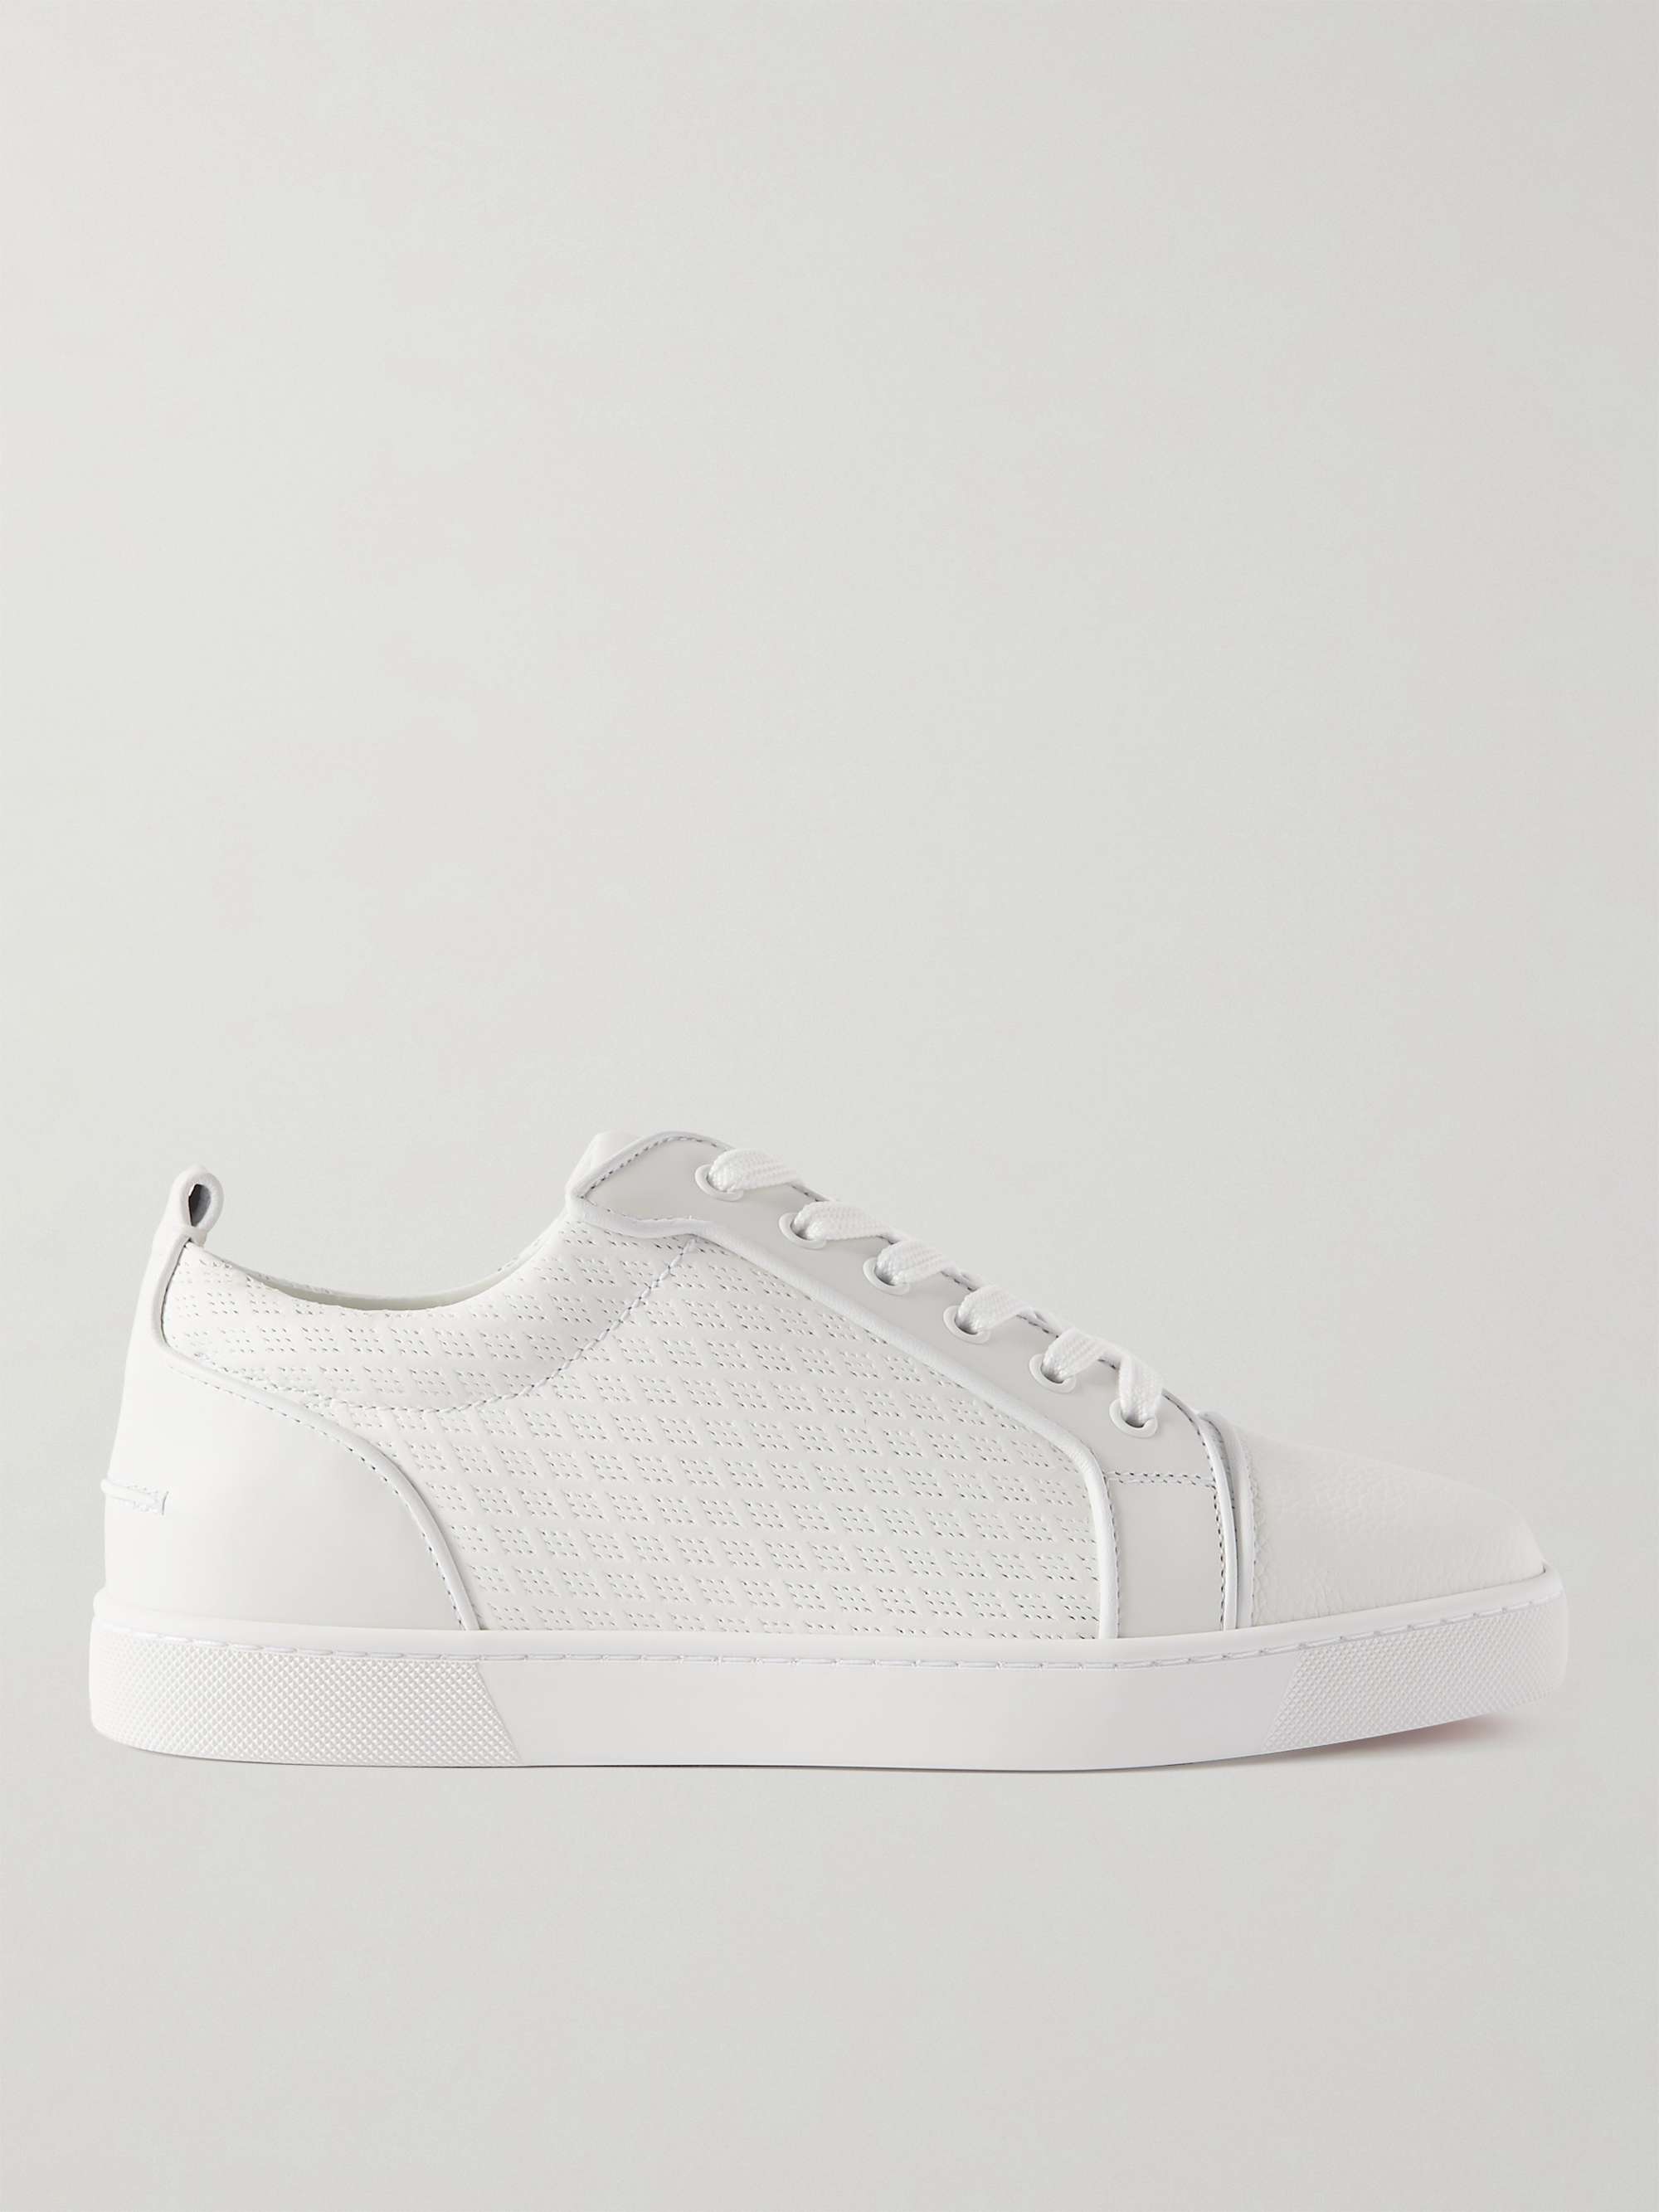 LOUBOUTIN Louis Perforated Leather Sneakers for Men MR PORTER